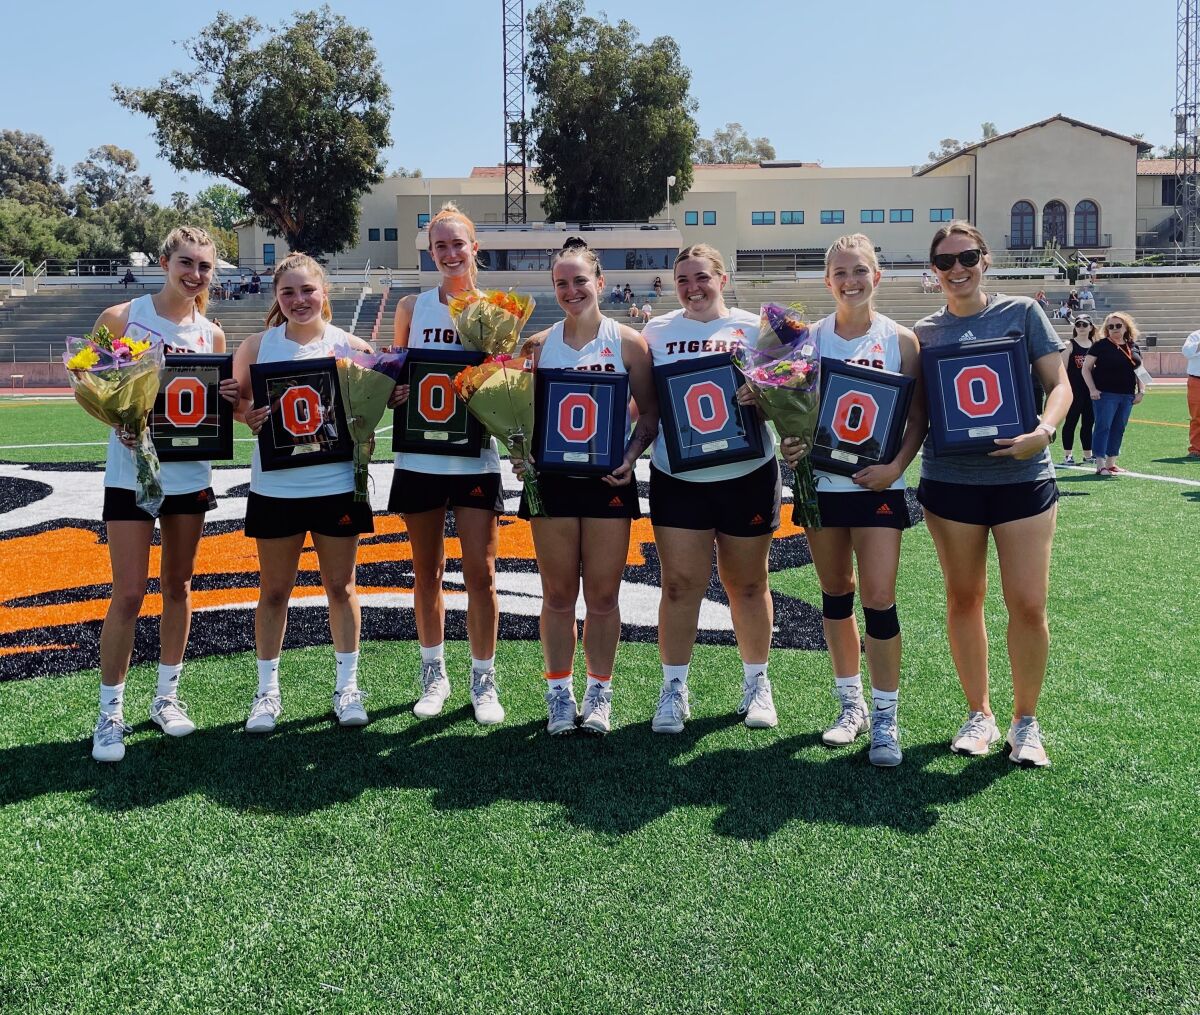 The six seniors of the Occidental women's lacrosse team pose for a photo with coach Hannah Khin before a game in April 2022.